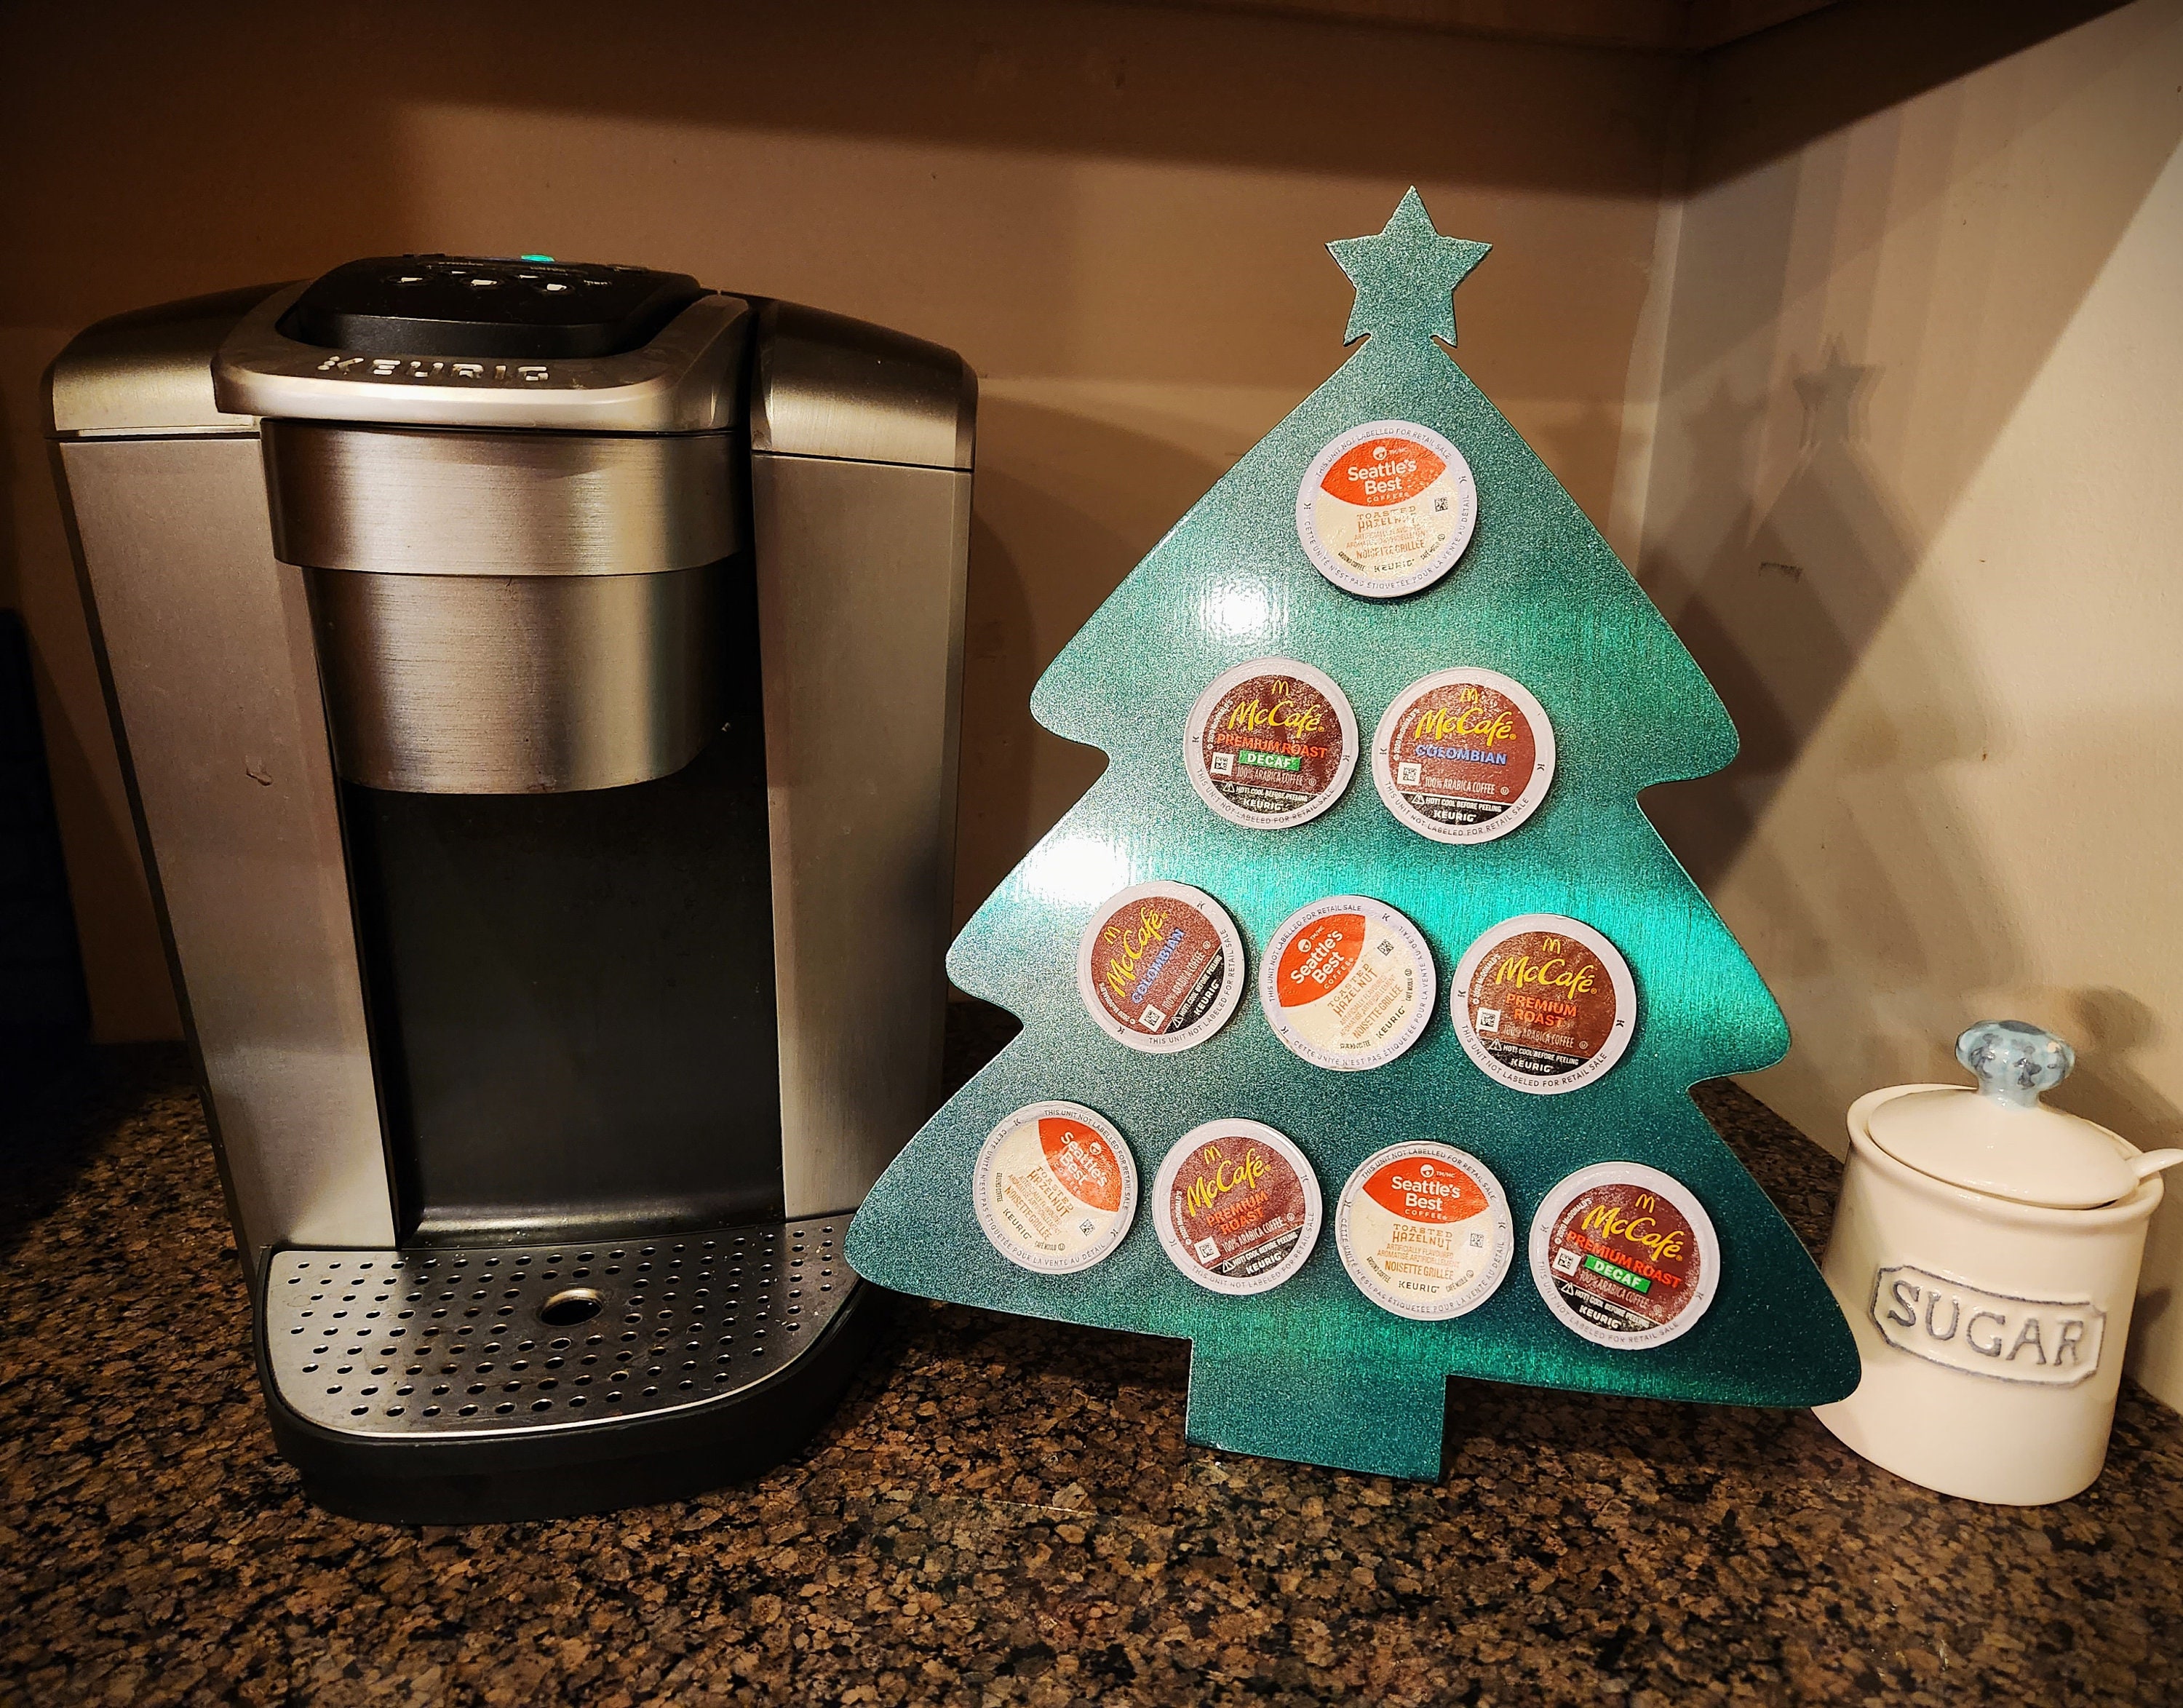 Keurig Coffee Maker Accessories • Compare prices »